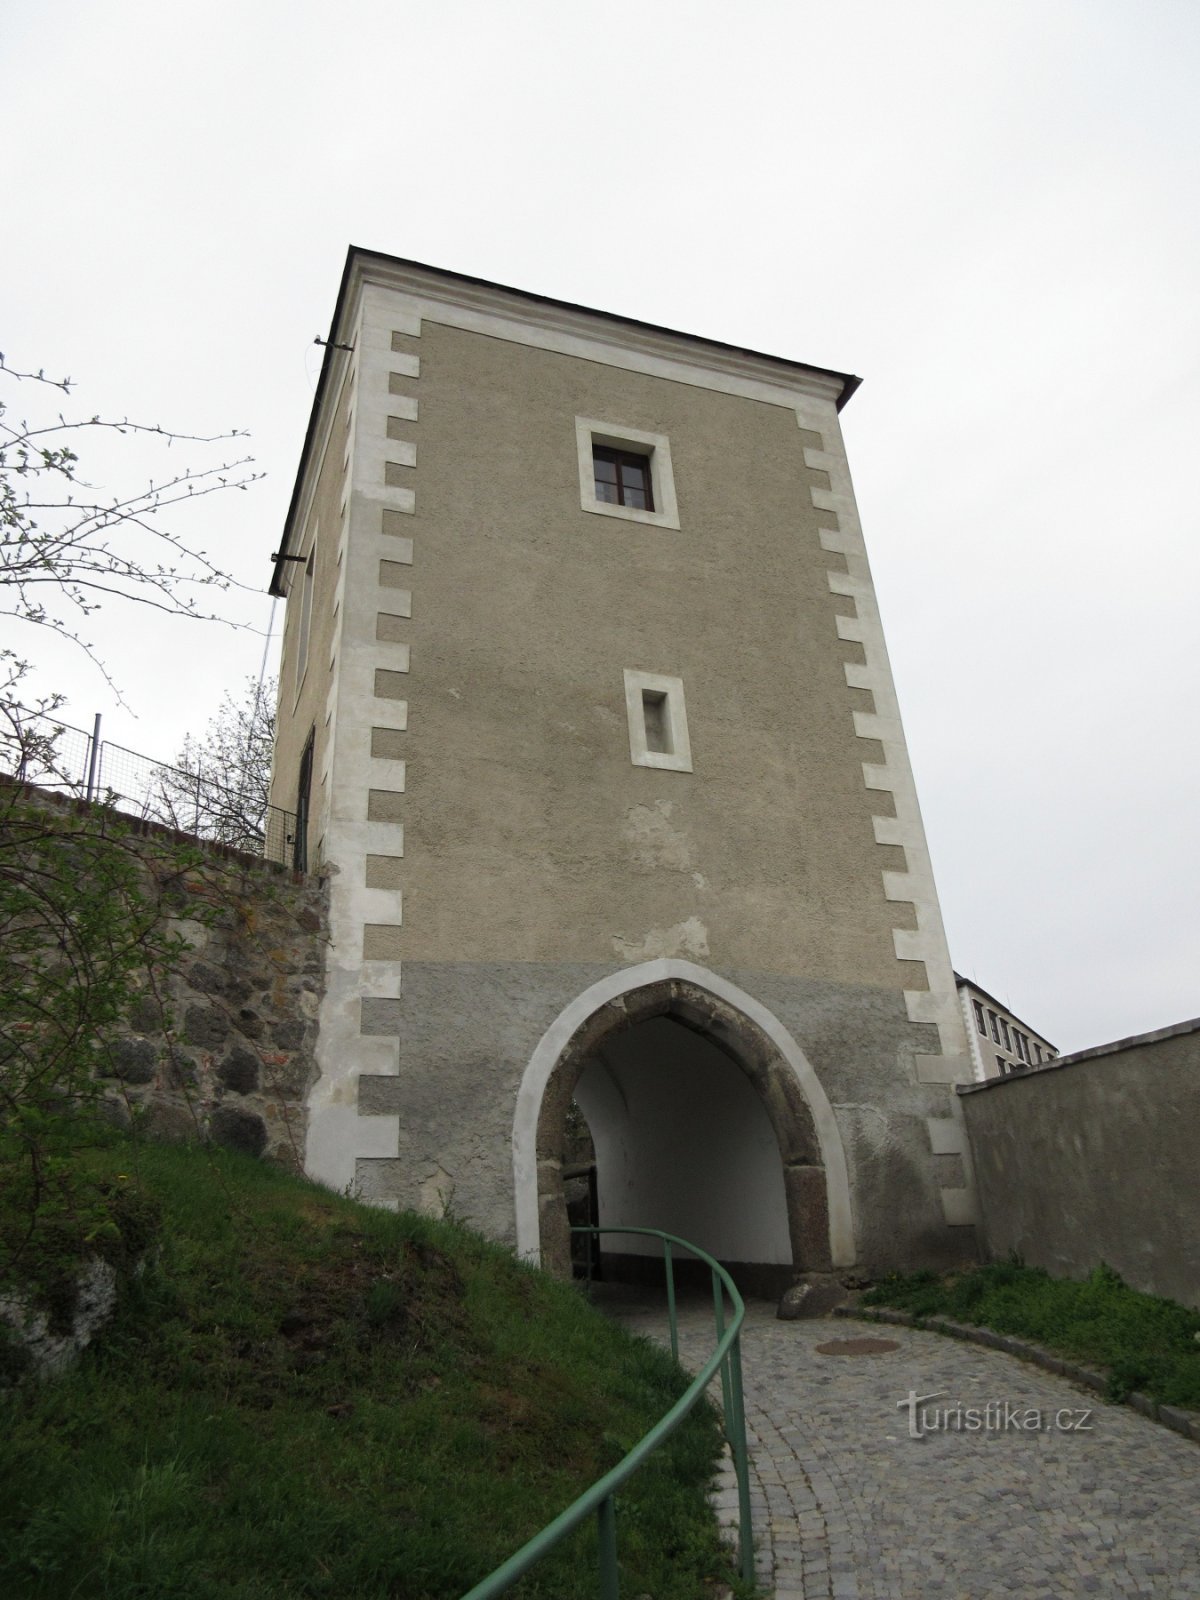 The way to the castle